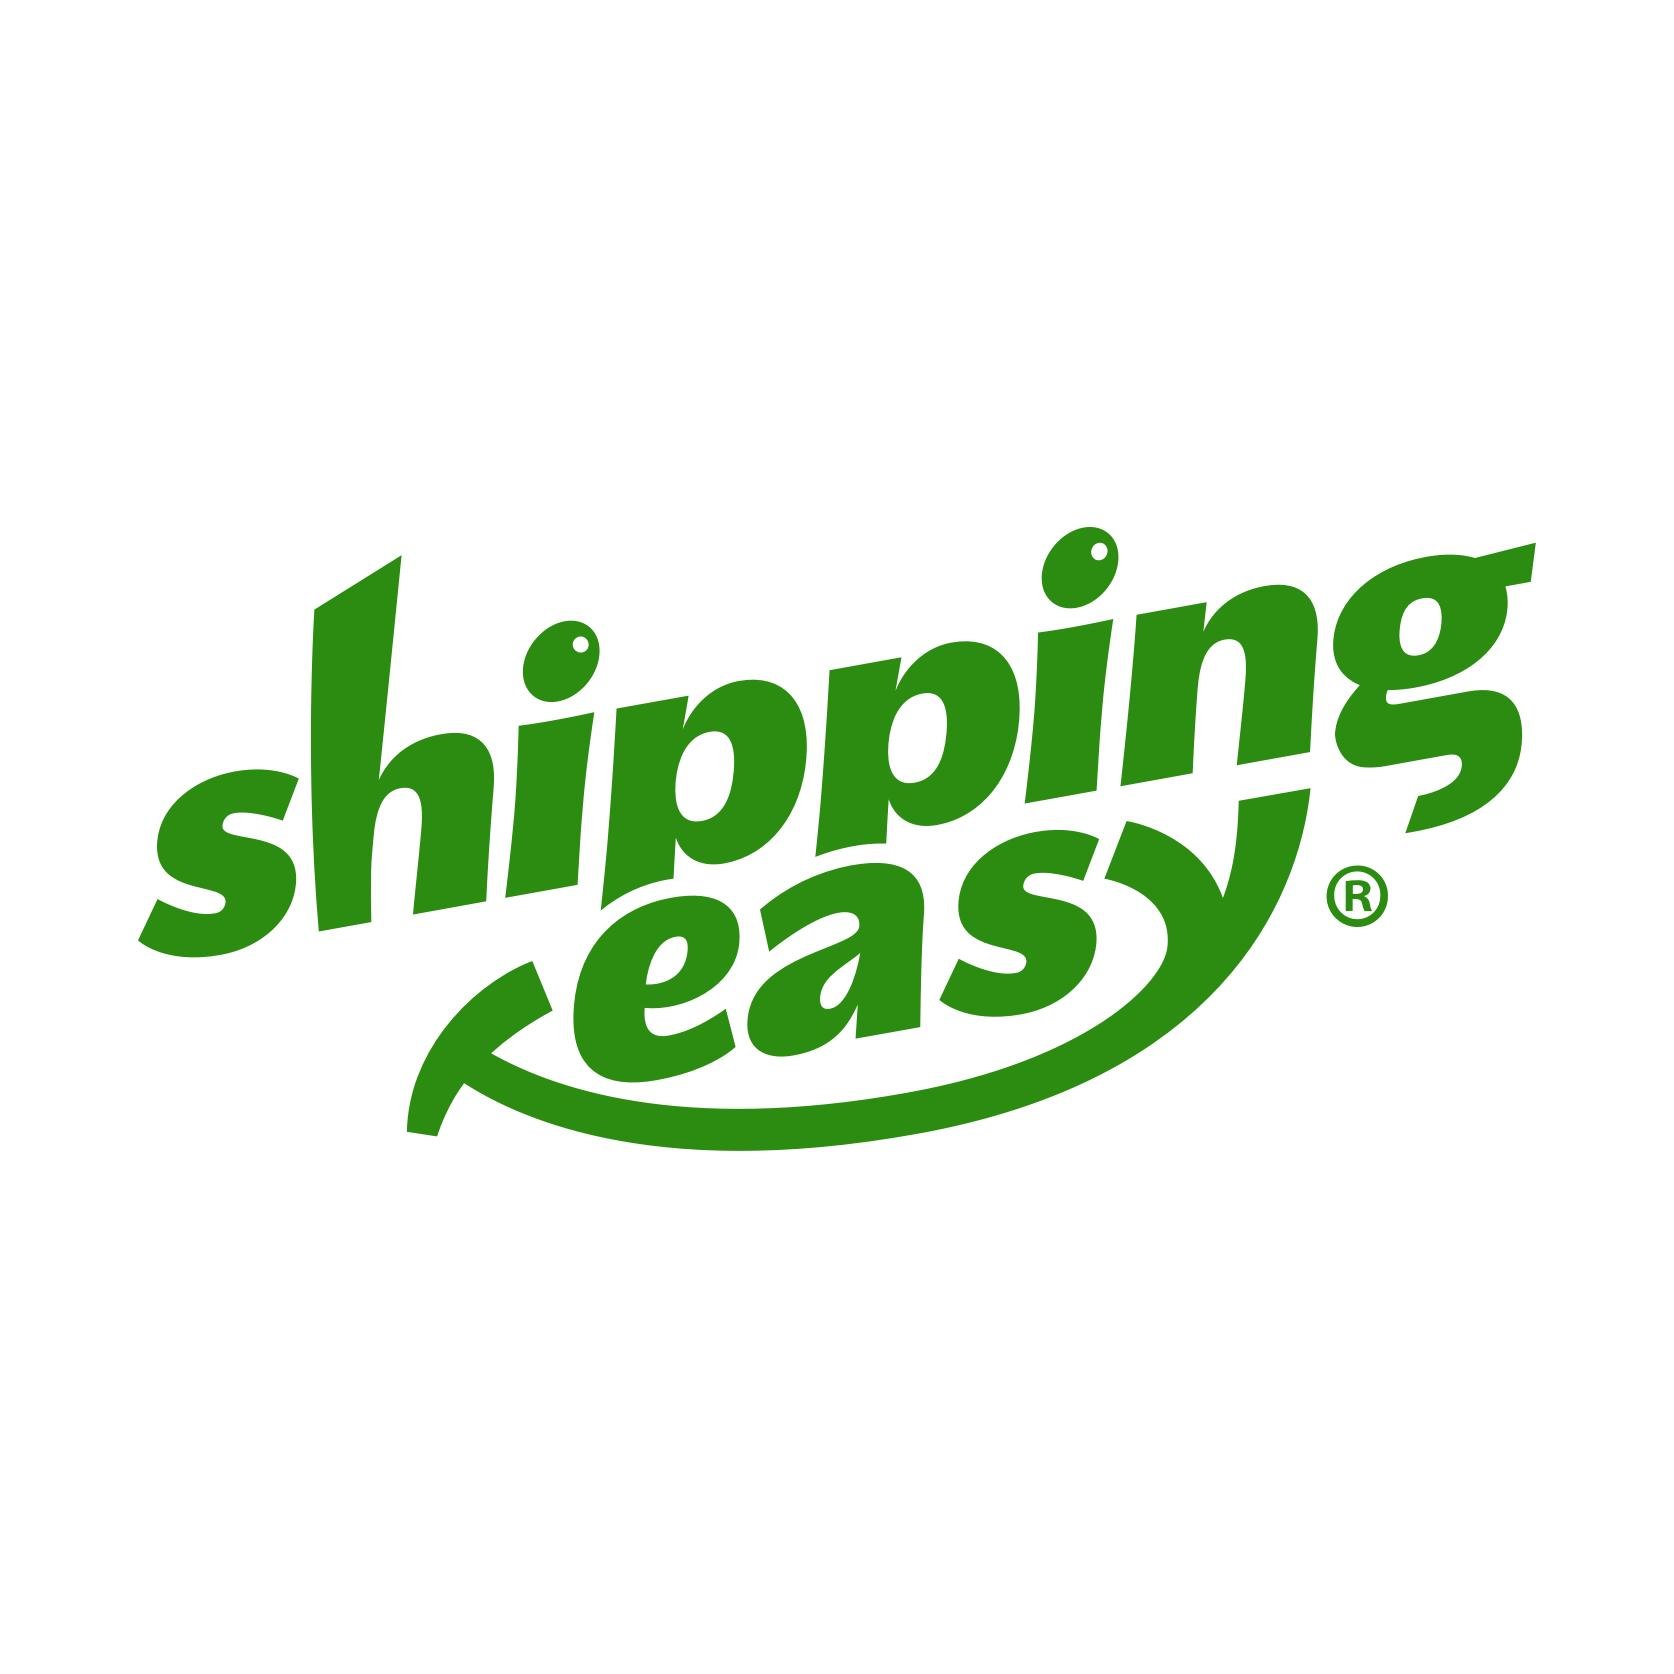 The easiest online shipping and email marketing platform for e-commerce merchants. Save time and money so you can focus on building your business!